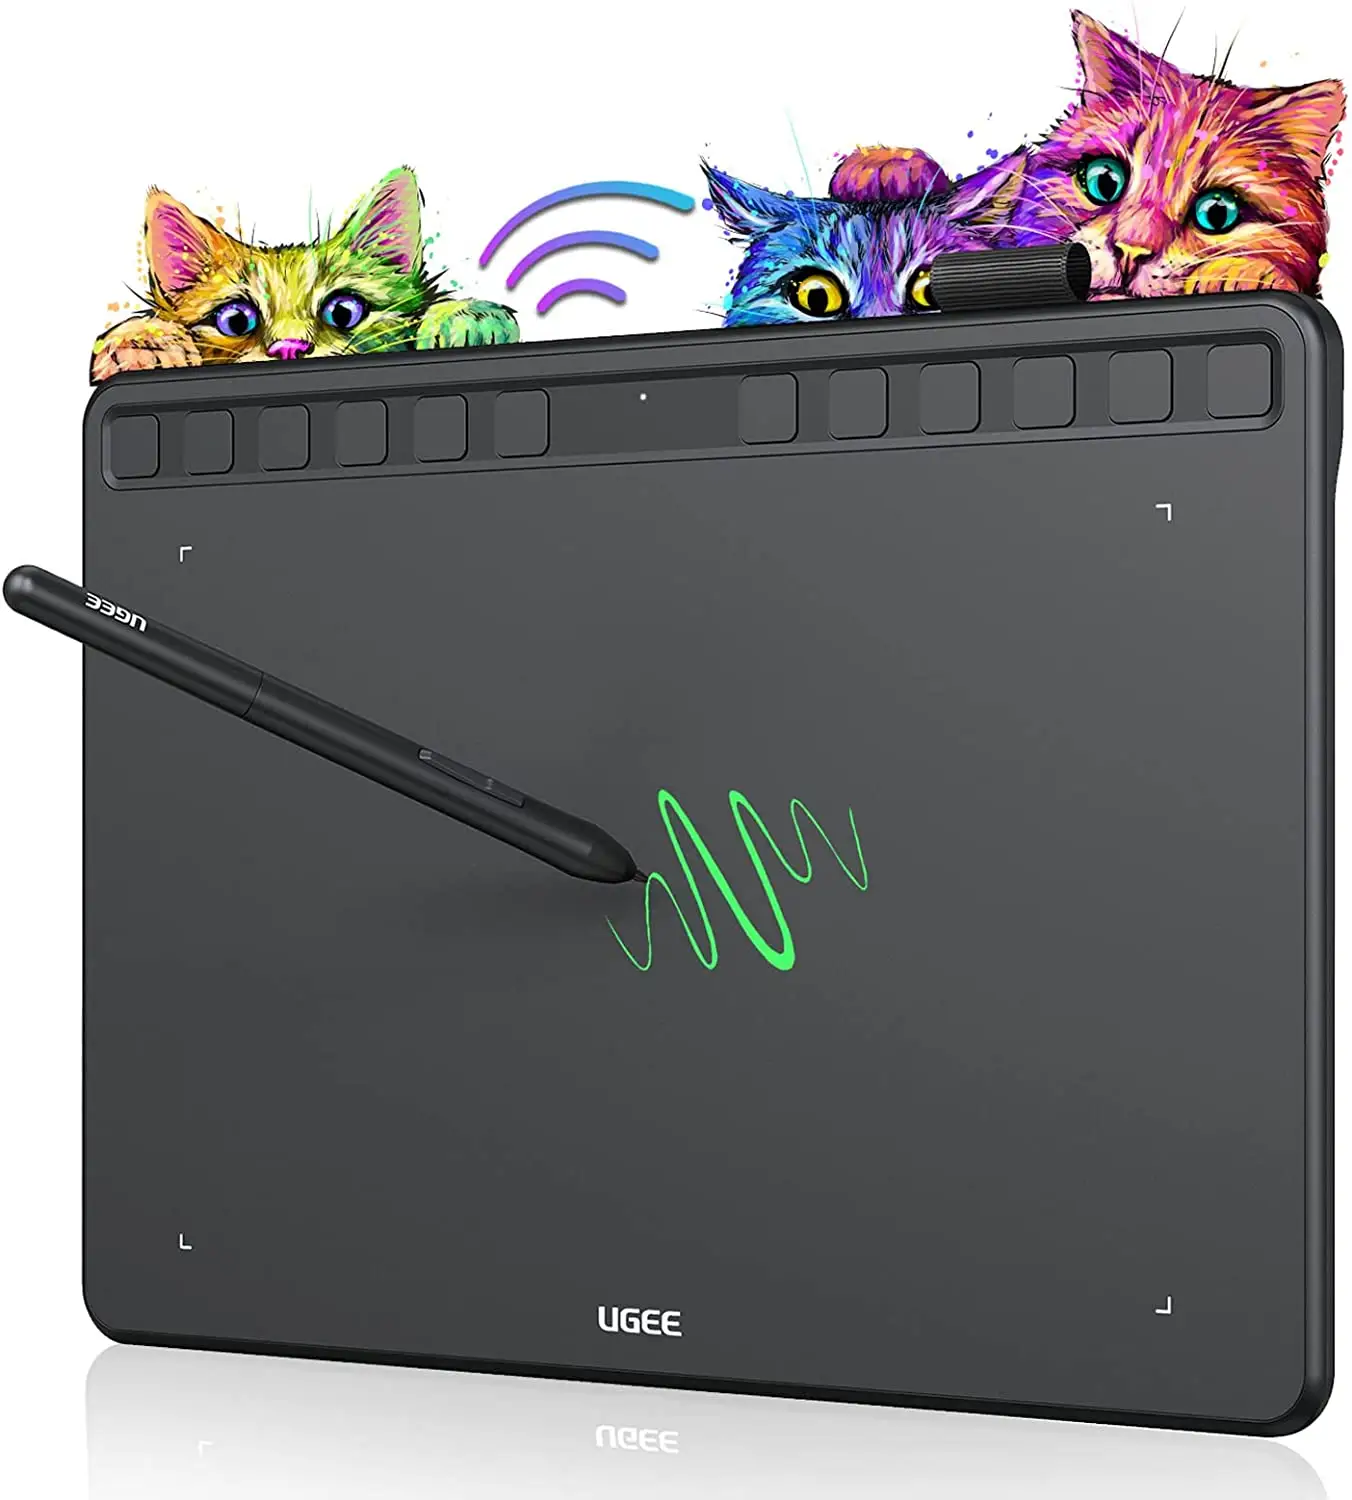 UGEE S1060W 10 inch Digital Drawing Tablet Wireless 2.4G Graphic Tablet Drawing Pad for Beginners Tablette Graphique